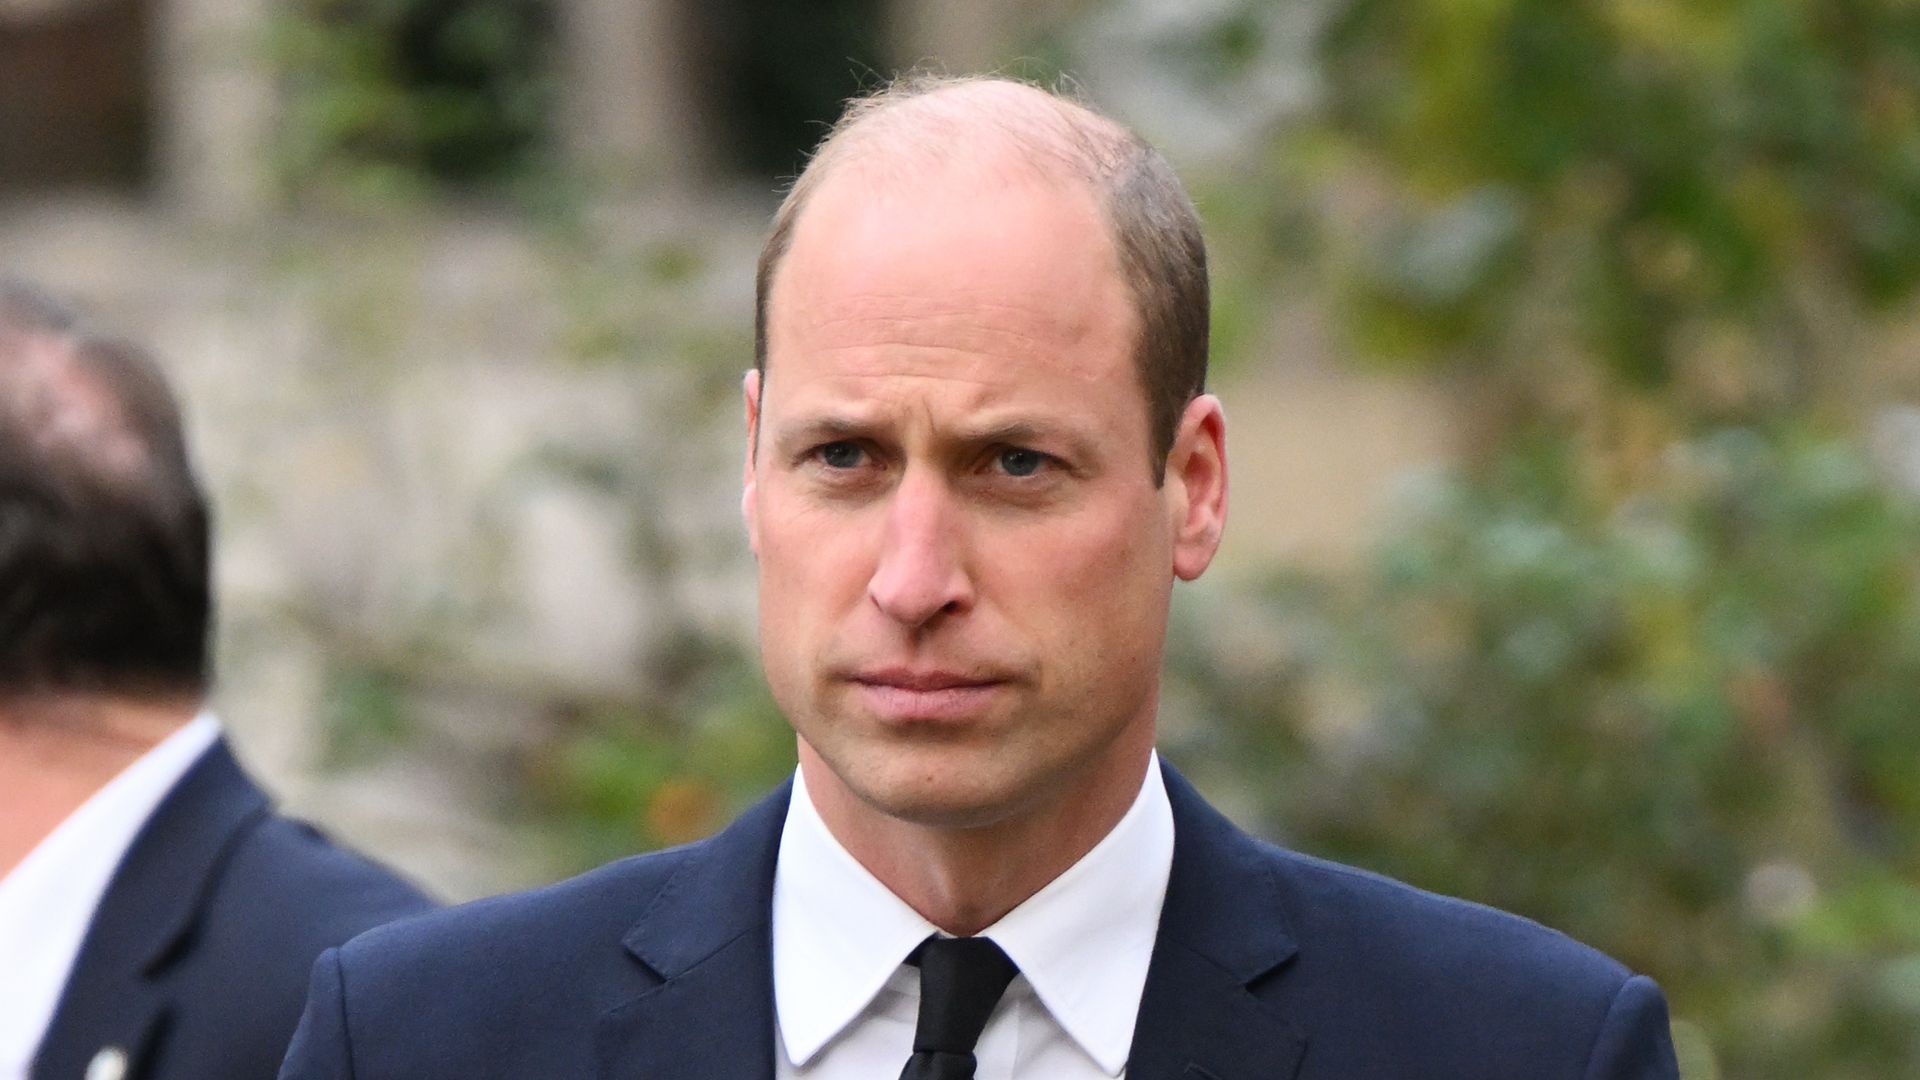 Prince William as pulled out of service